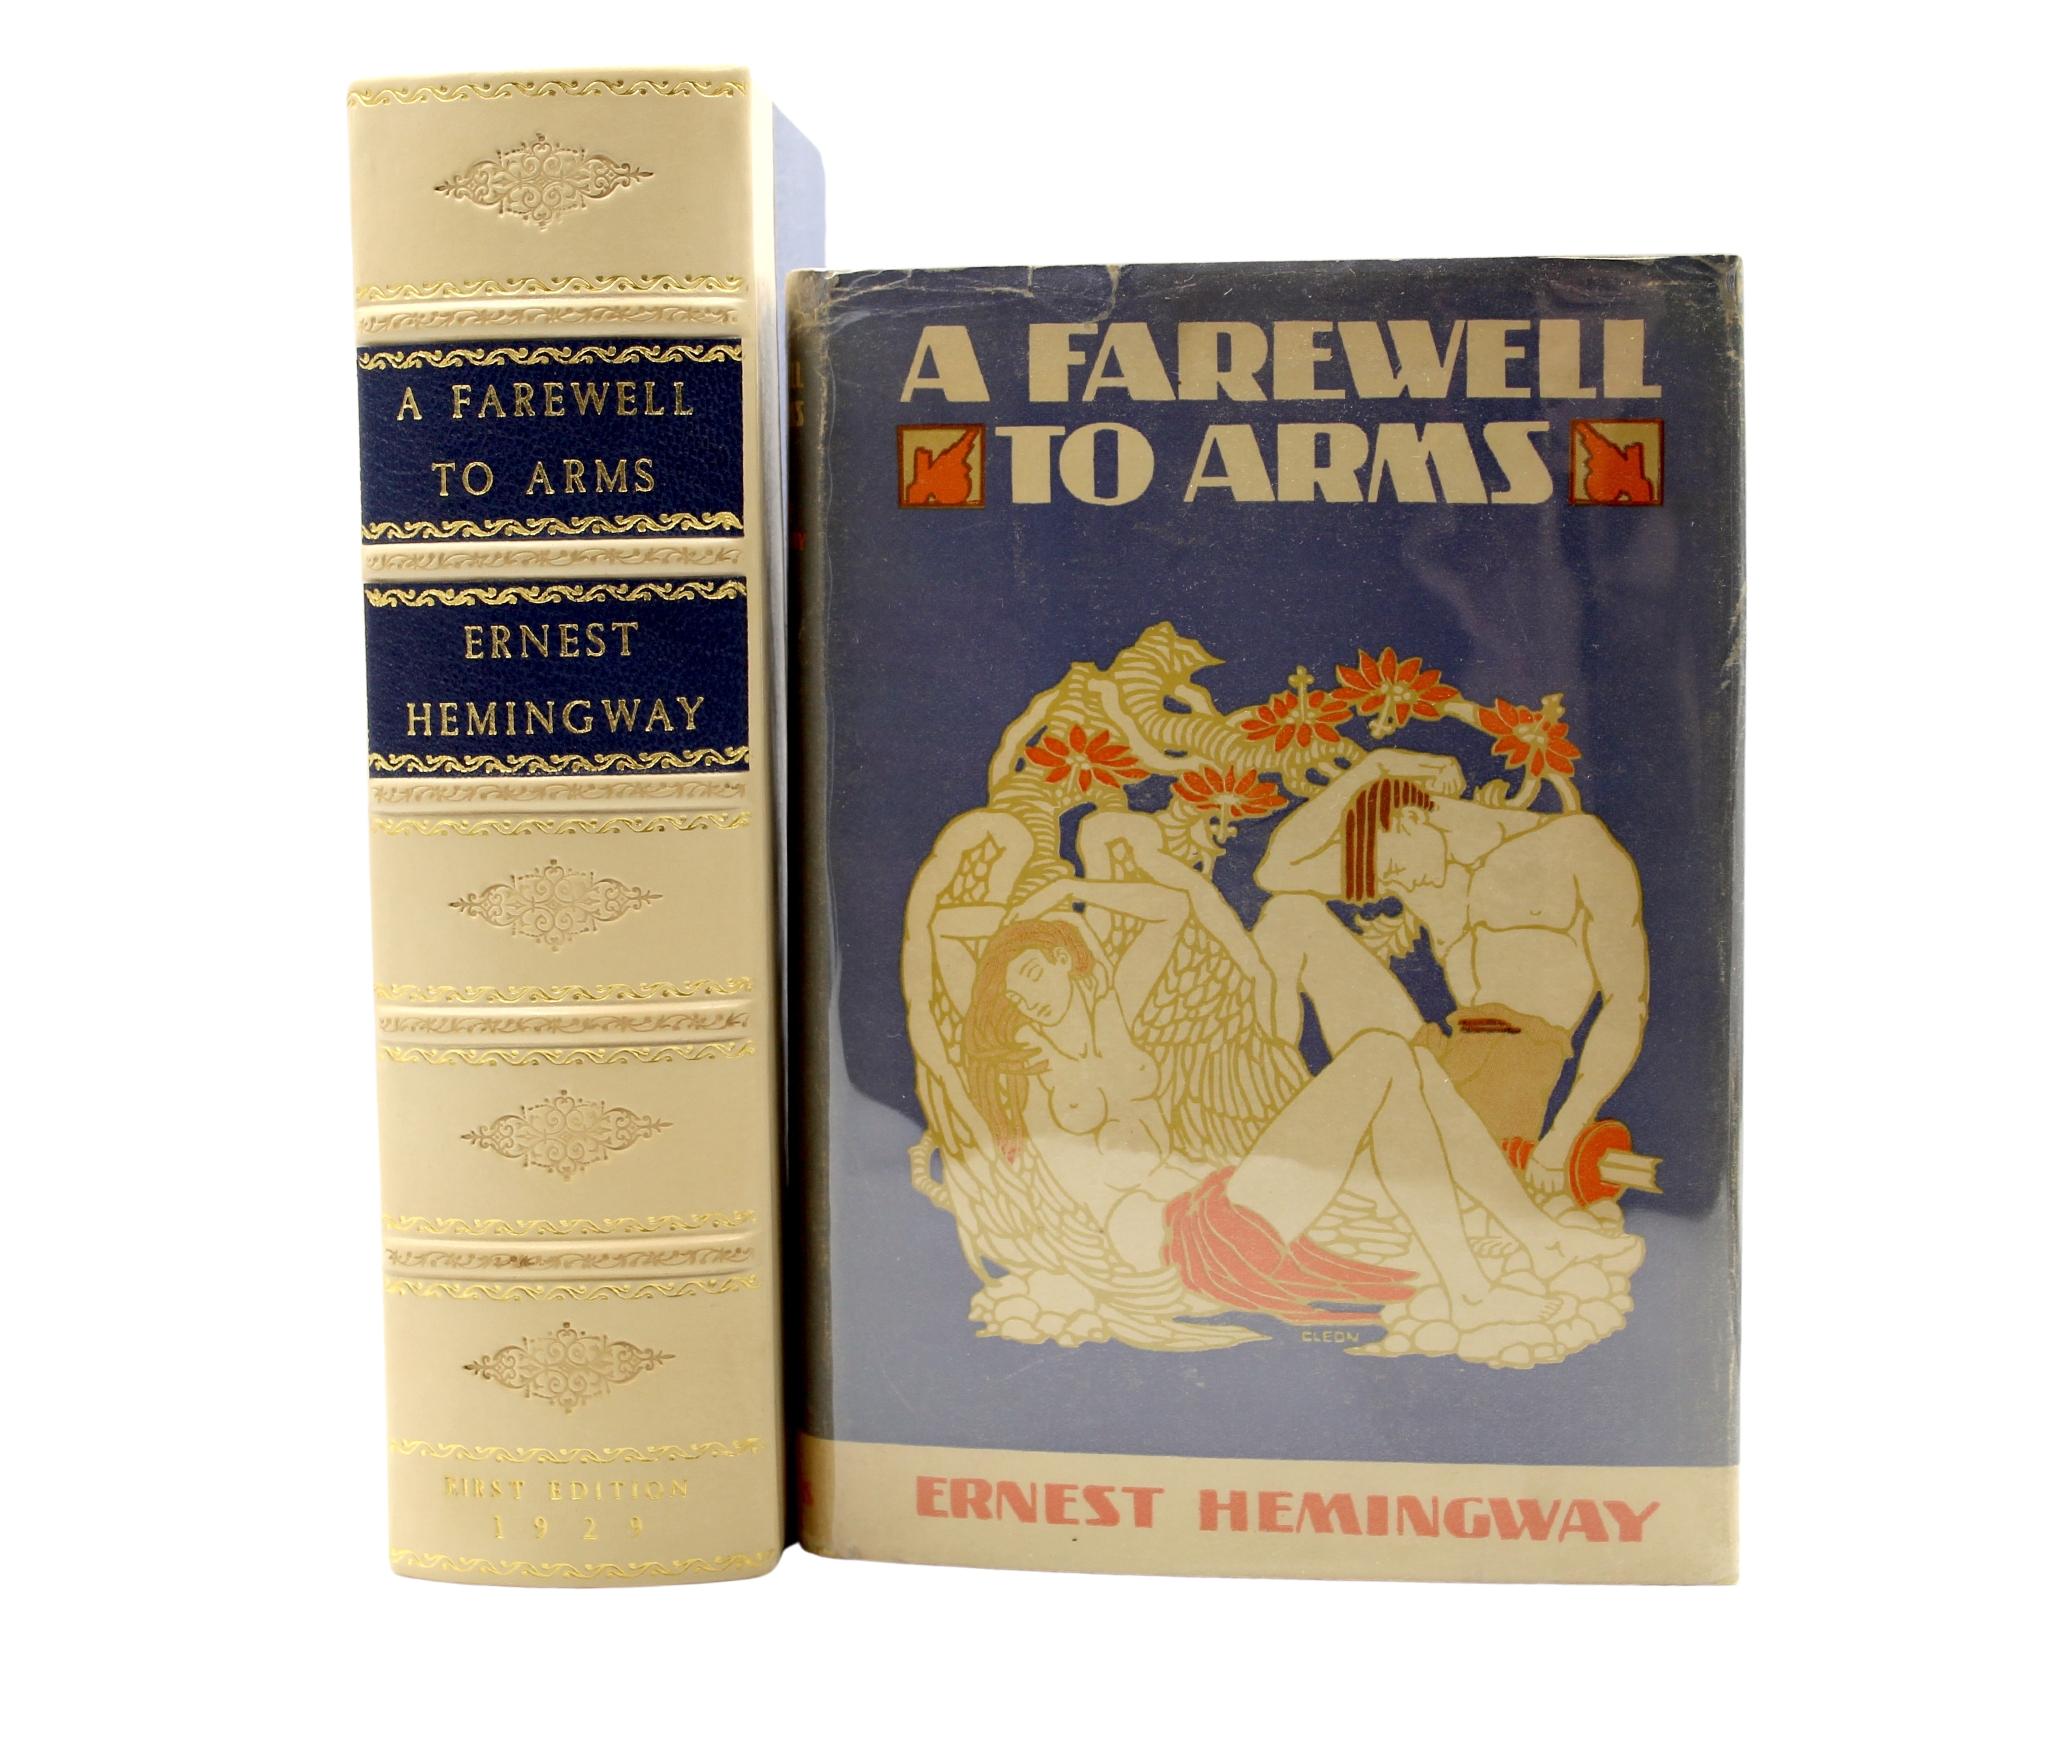 Modern A Farewell to Arms by Ernest Hemingway, First Trade Edition, in Dust Jacket For Sale